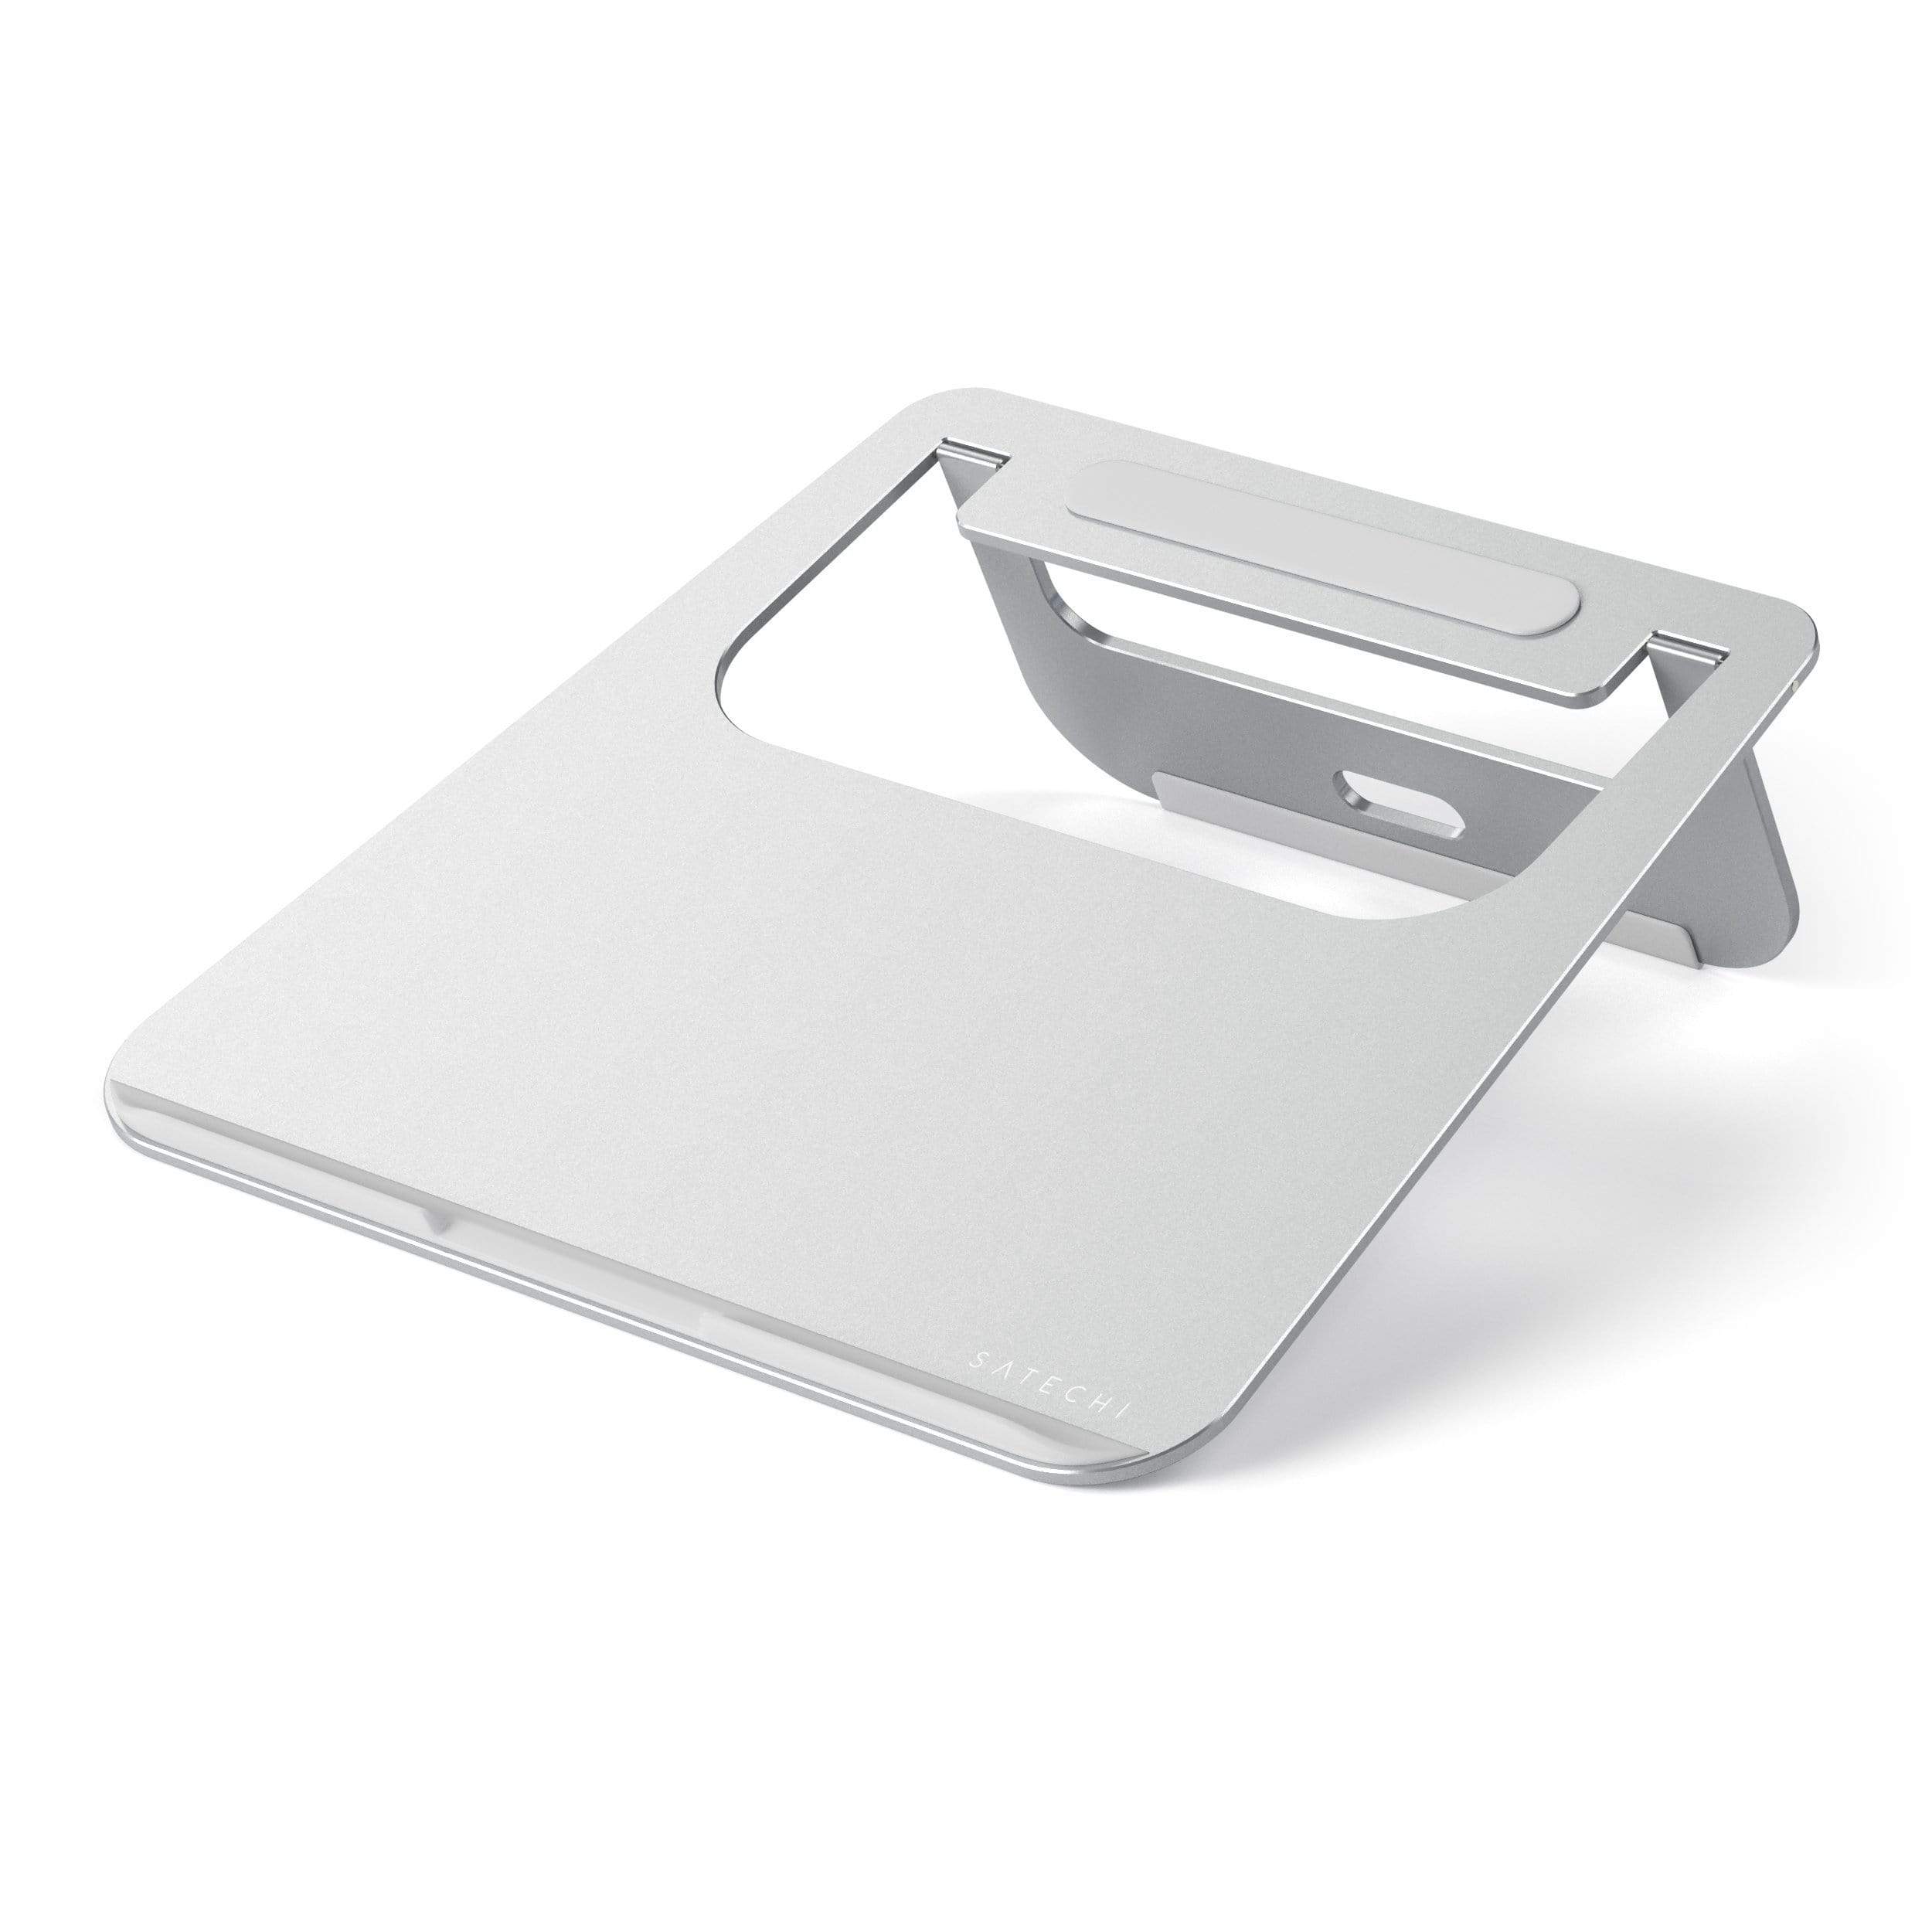 Aluminum Laptop Stand for Laptops, Notebooks, and Tablets Computers/ Monitors Satechi Silver 